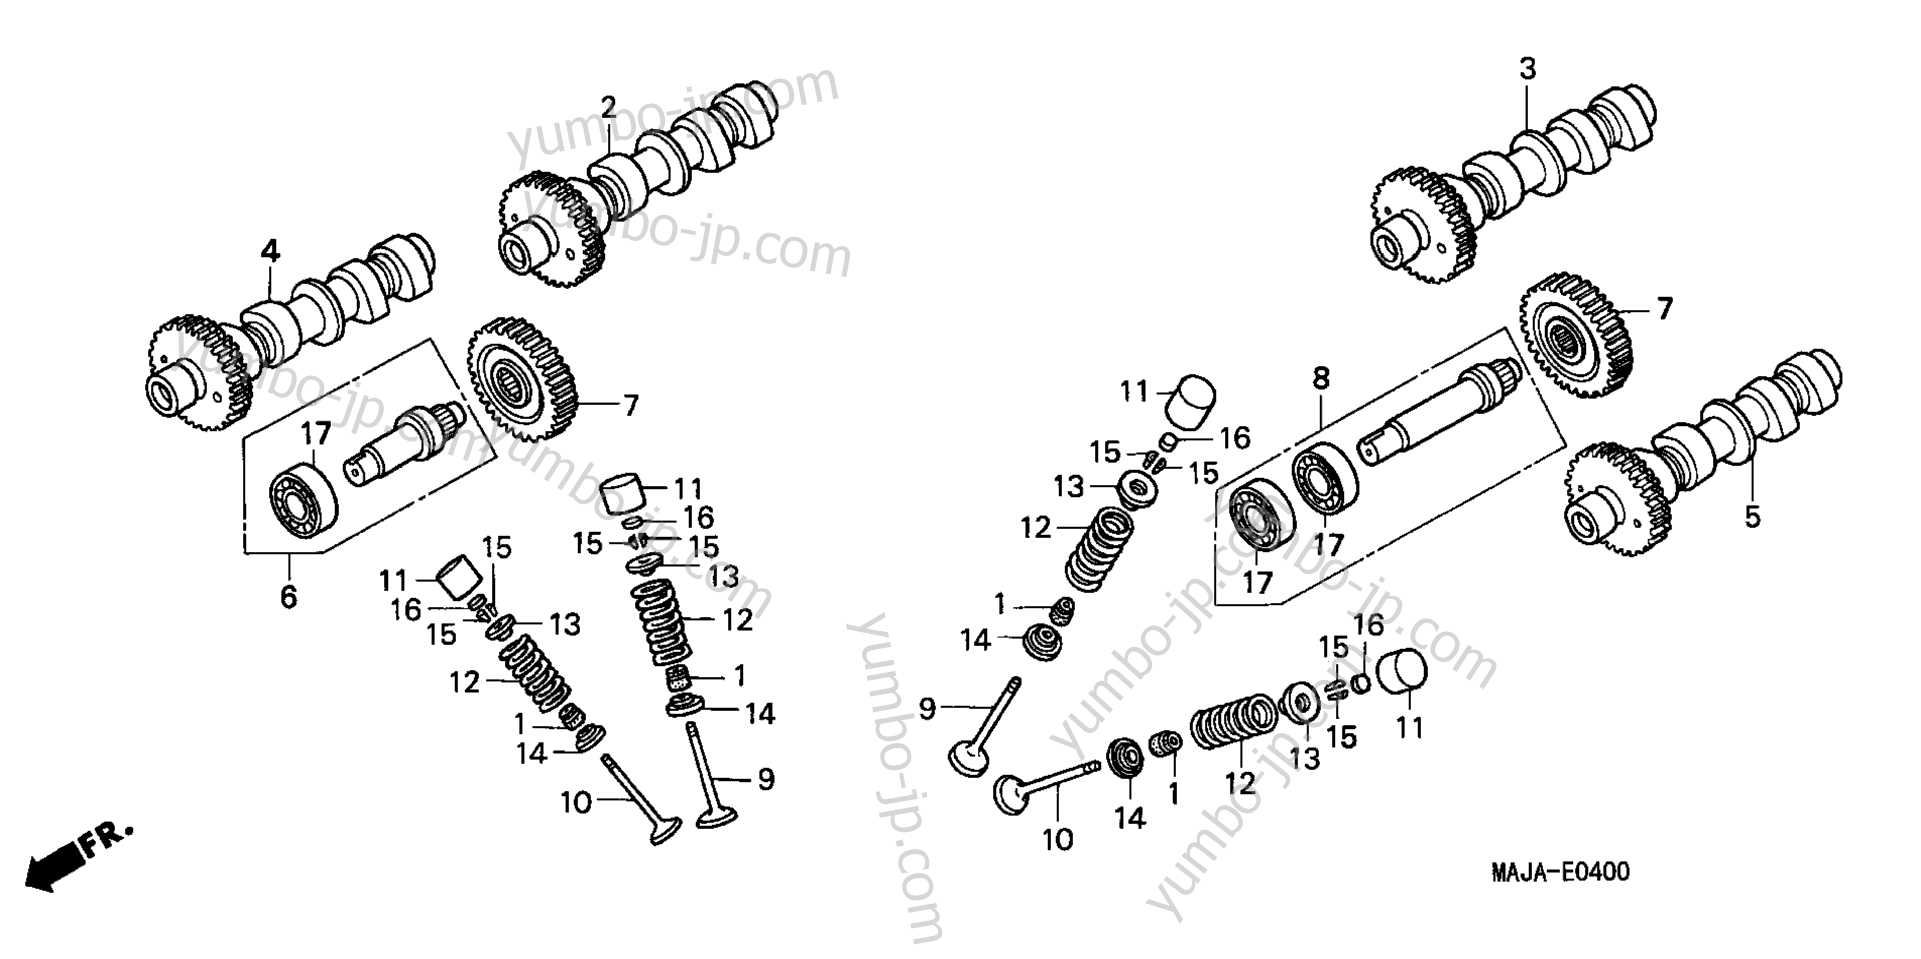 CAMSHAFT / VALVE for motorcycles HONDA ST1100 A 2002 year